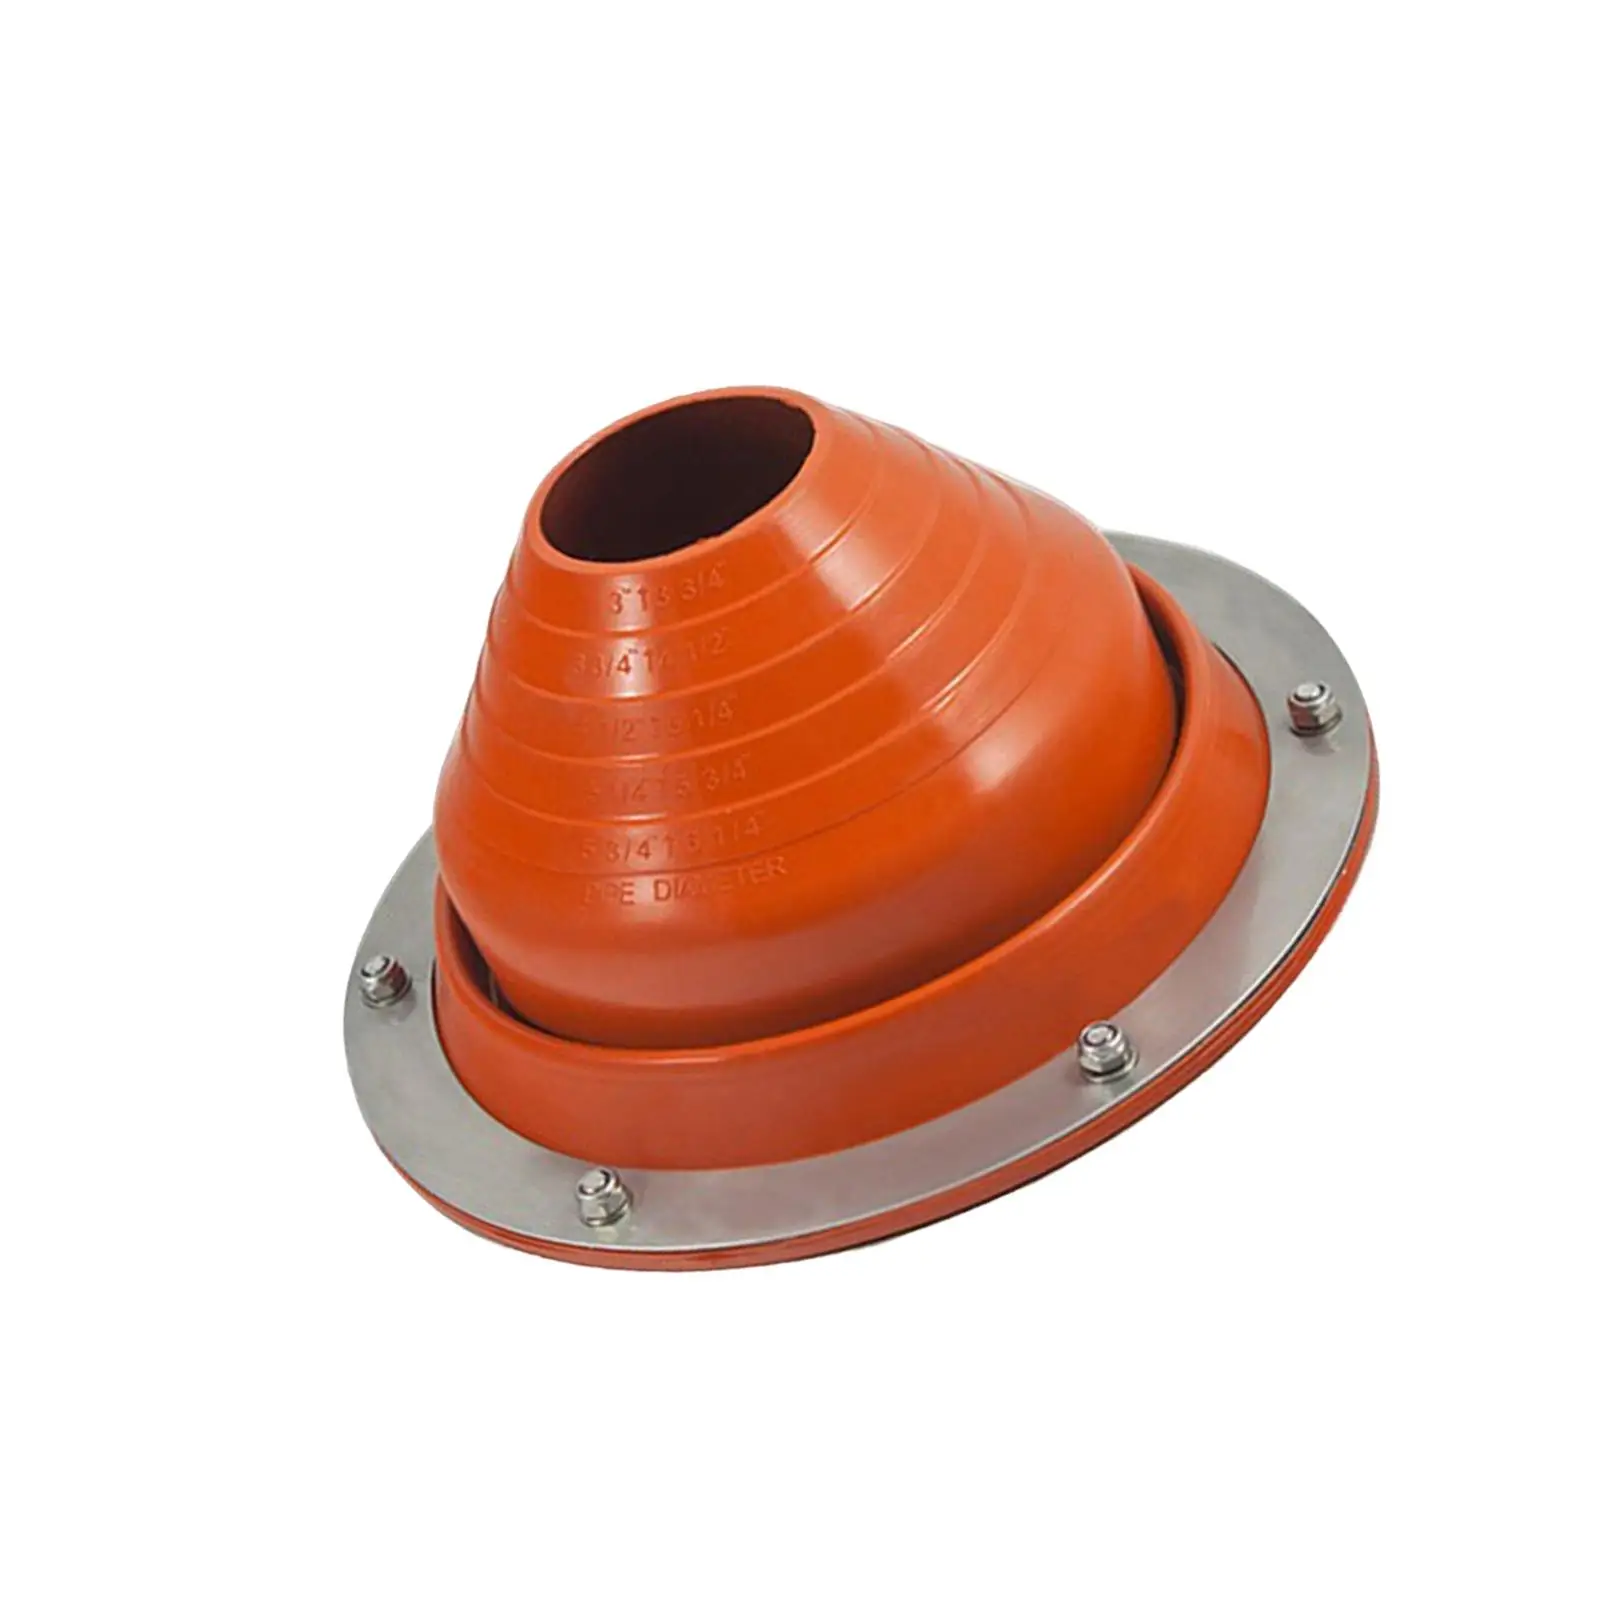 Tent Jack Pipe Vent Accessory Fire Resistant Keep Your Use Of Hot Flue Pipes Safe and Secure